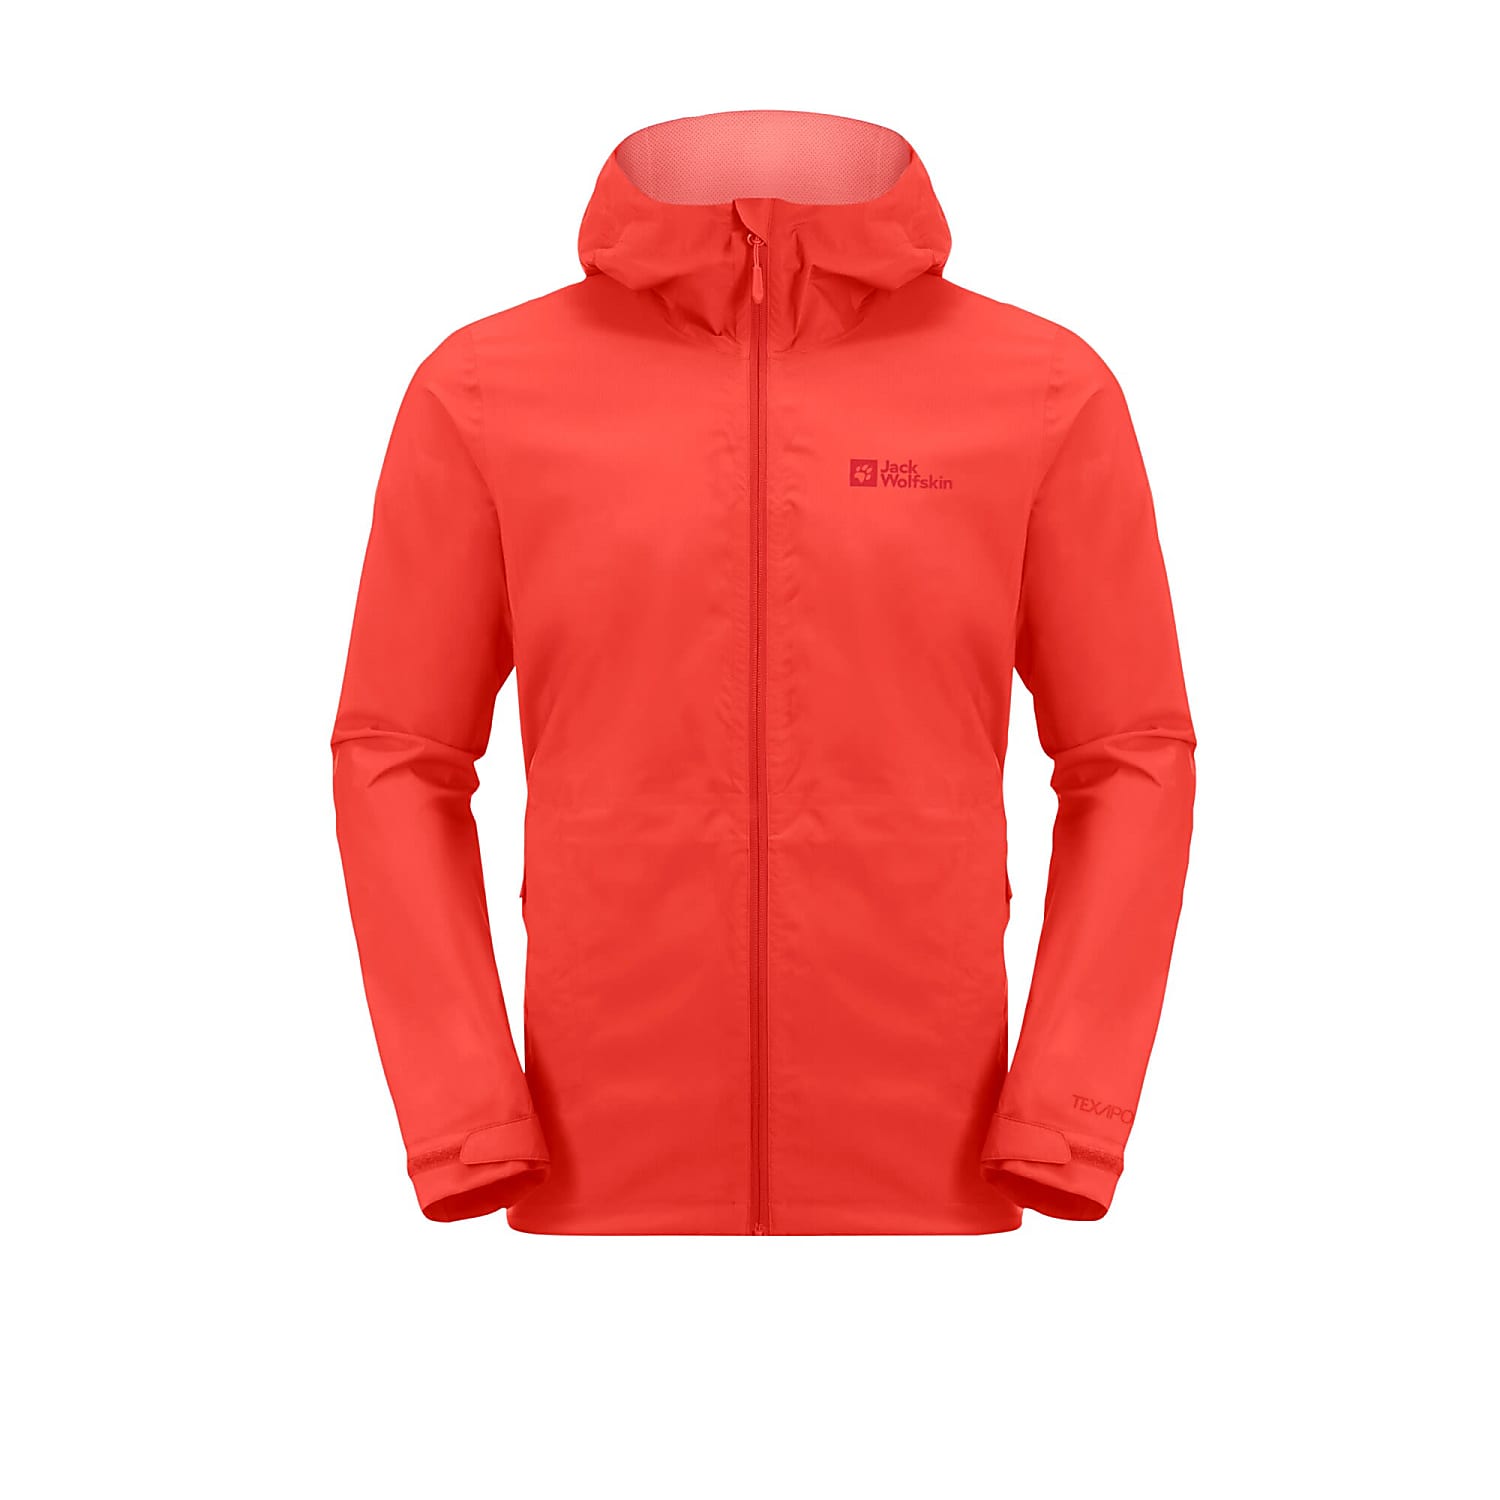 Jack Wolfskin M ELSBERG 2.5L Red shipping and JKT, Fast Strong cheap 